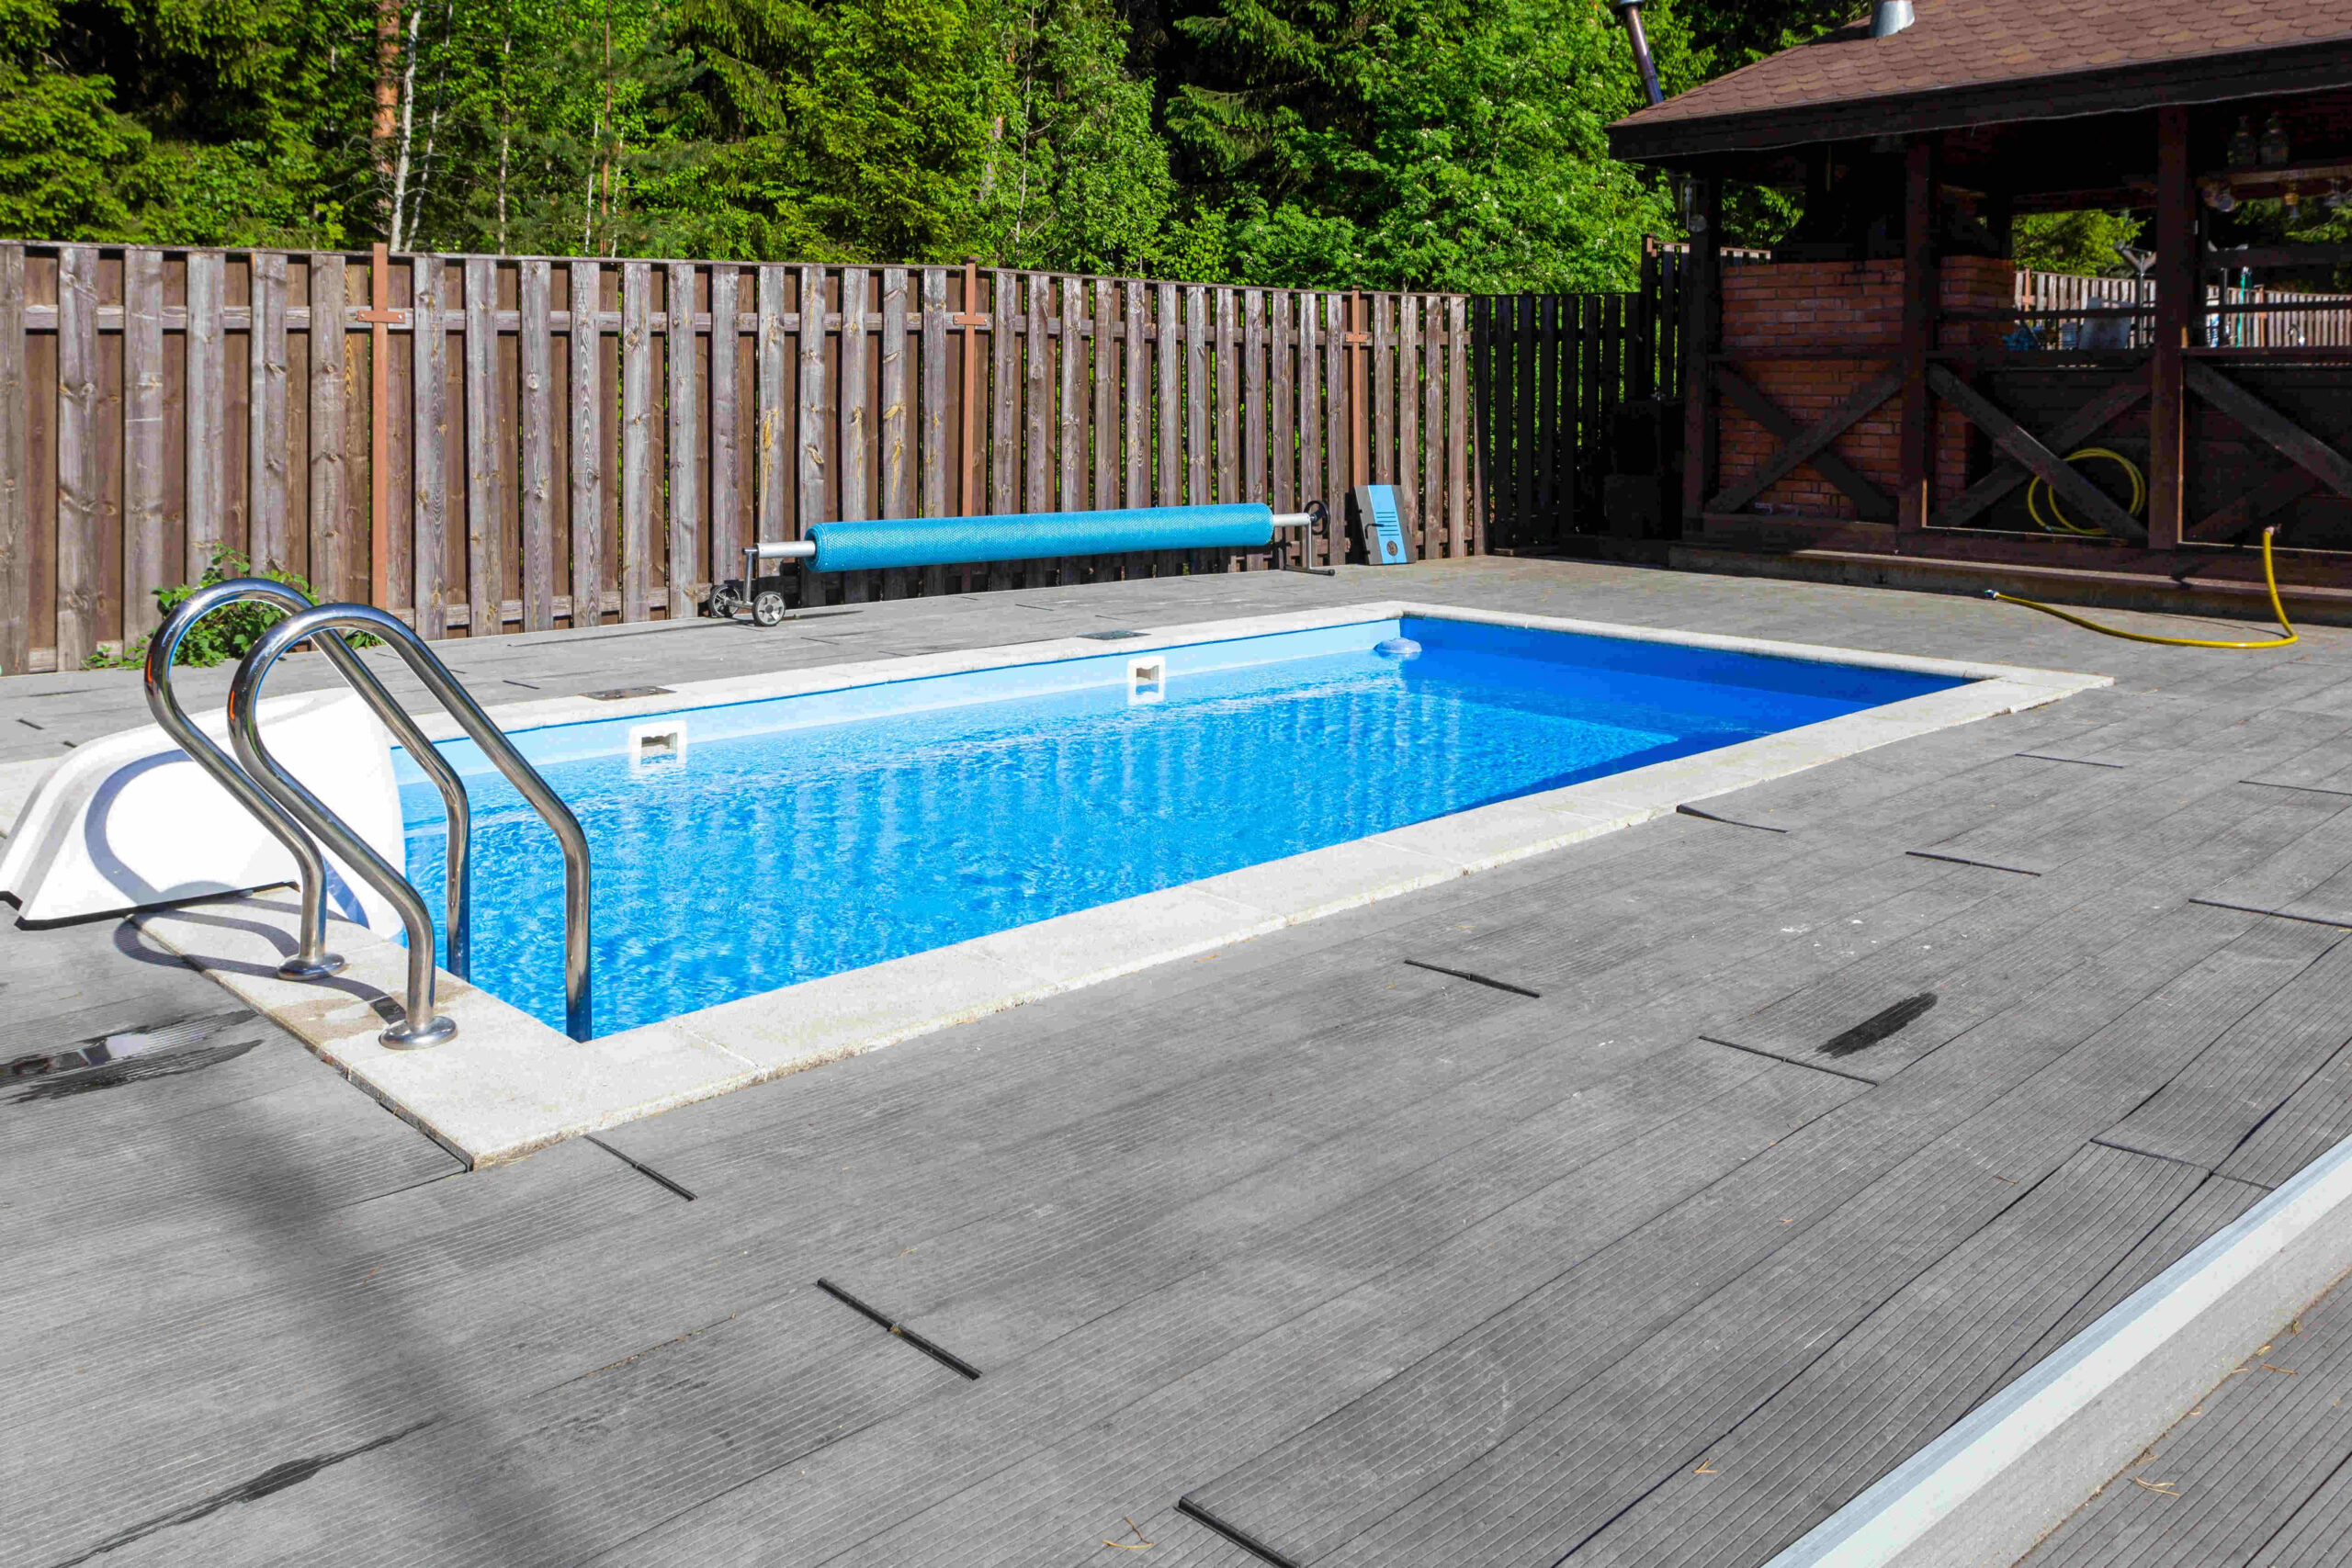 An Inground Pool In A Small Backyard, Inground Pool For Small Yards